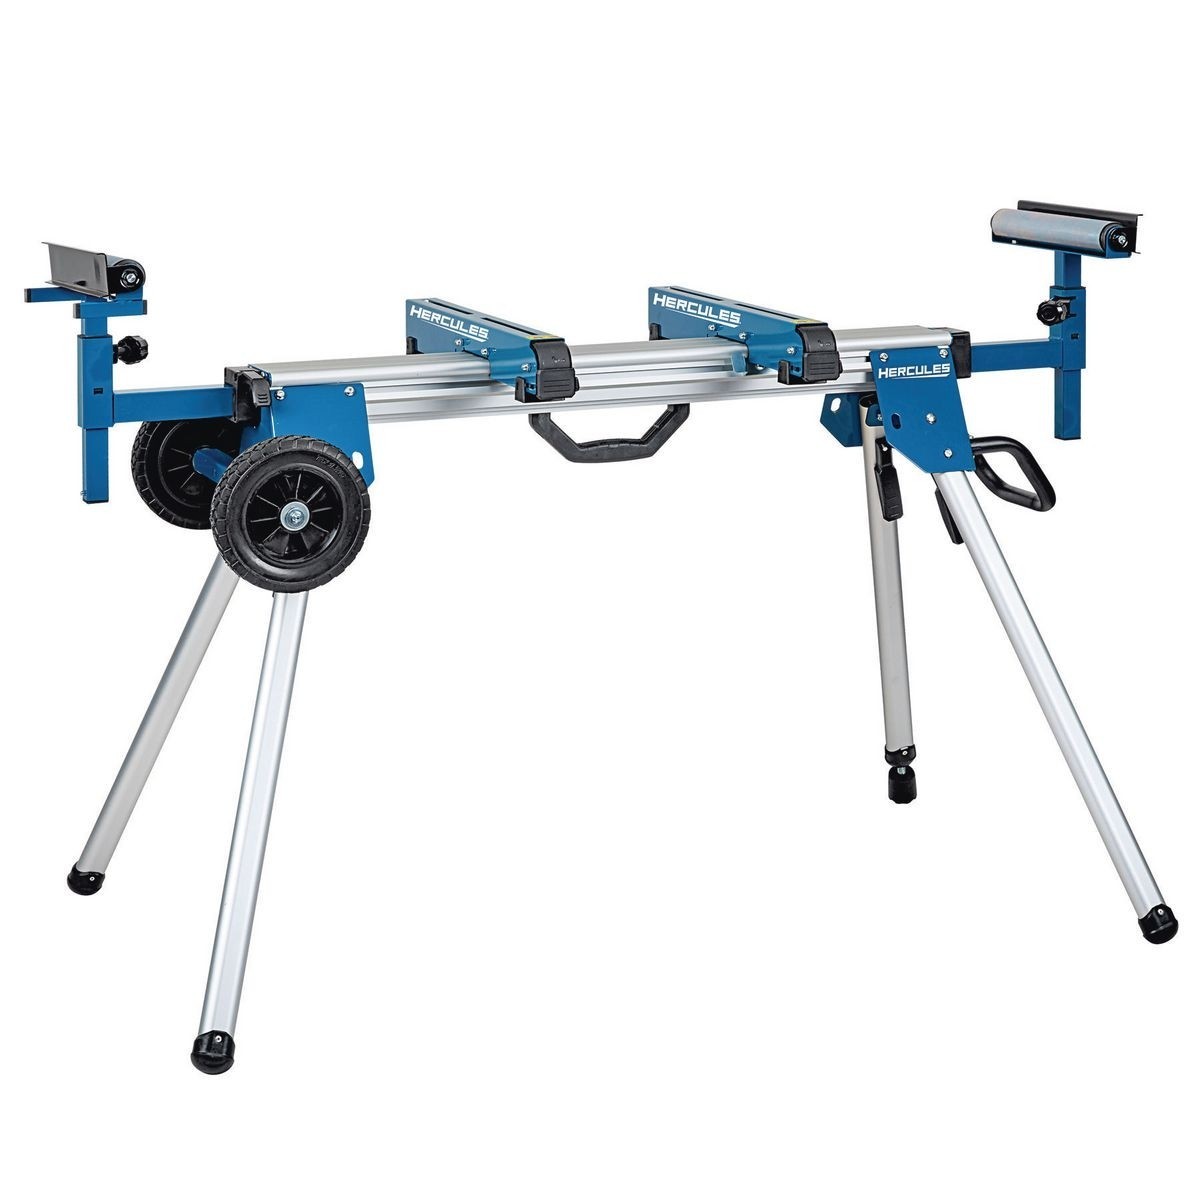 HERCULES Professional Rolling Miter Saw Stand - Power Tools